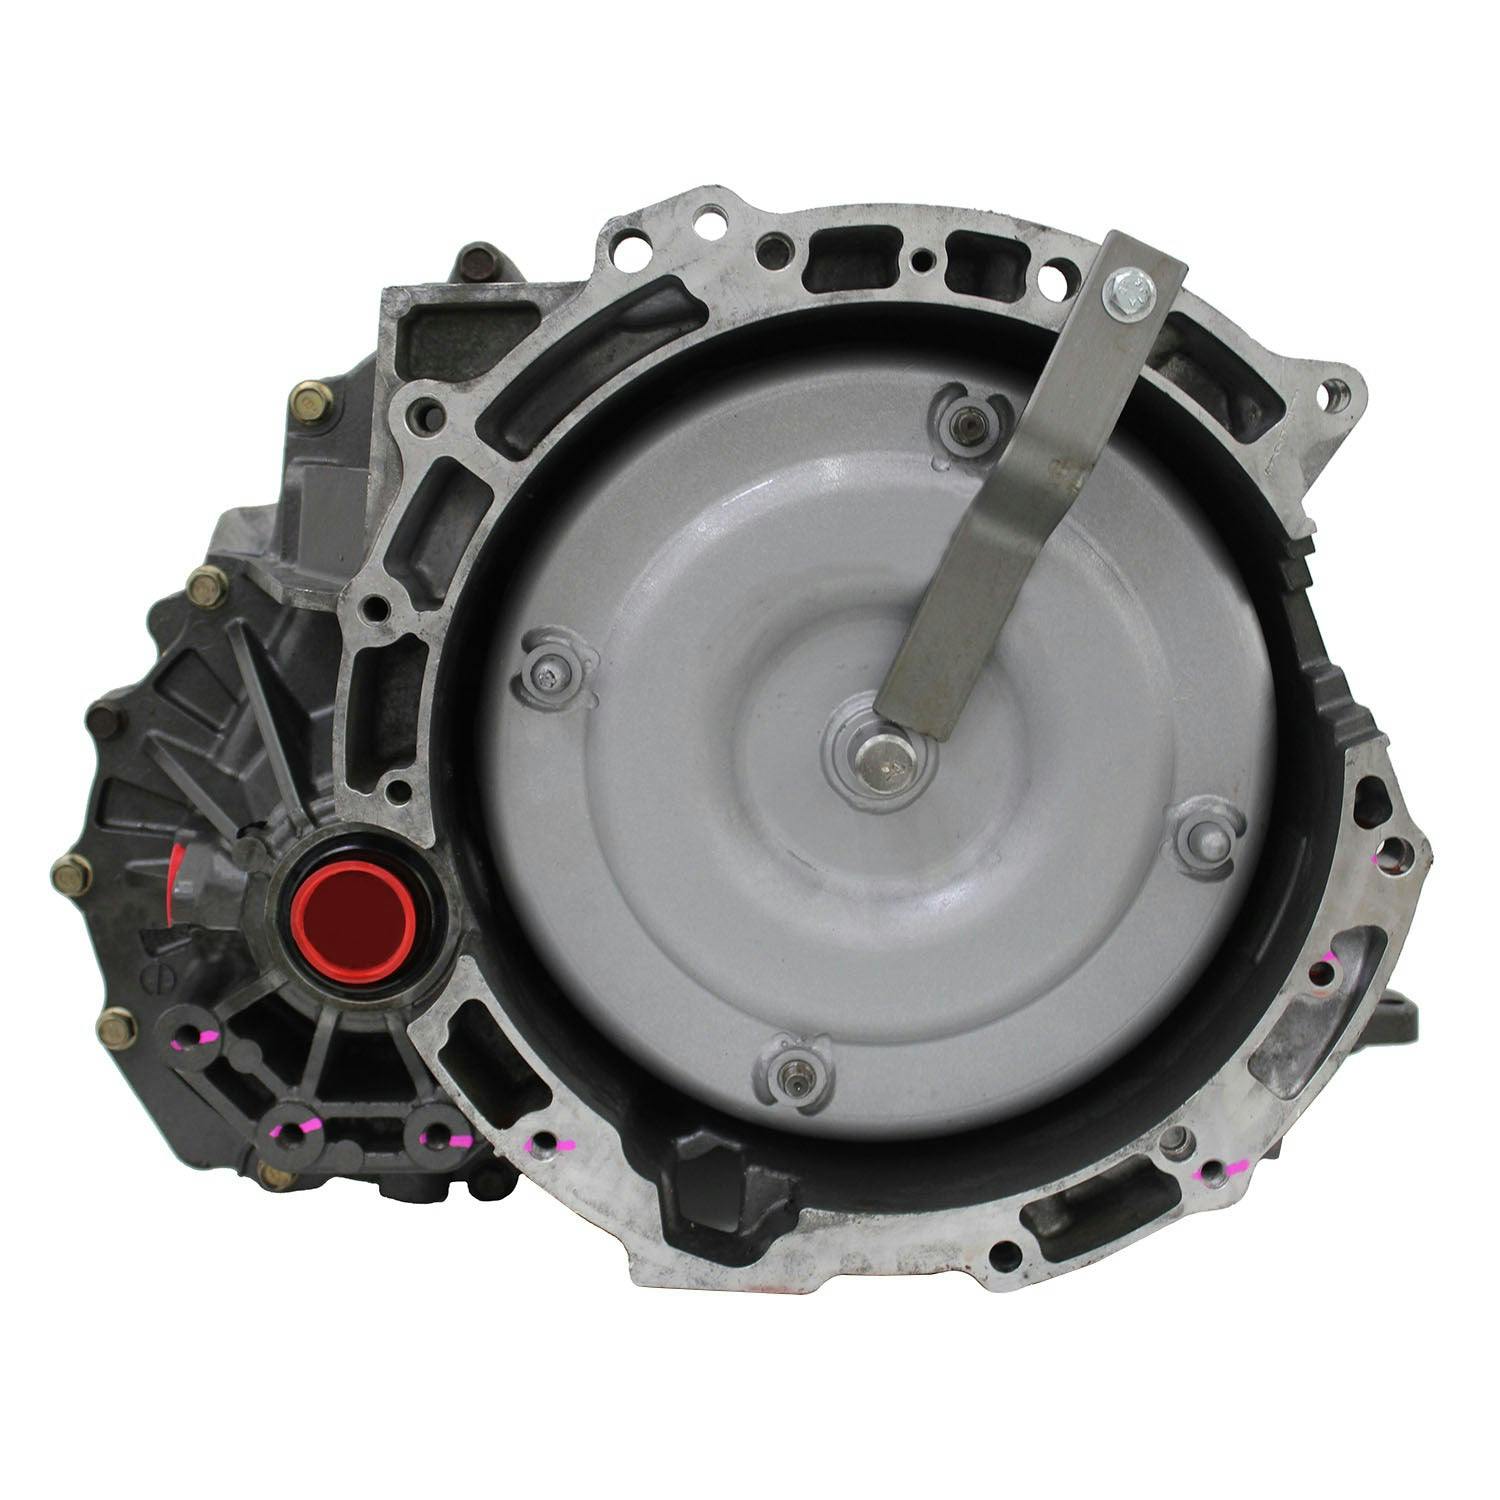 Automatic Transmission for 2004-2005 Mazda 3 FWD with 2.3L Inline-4 Engine